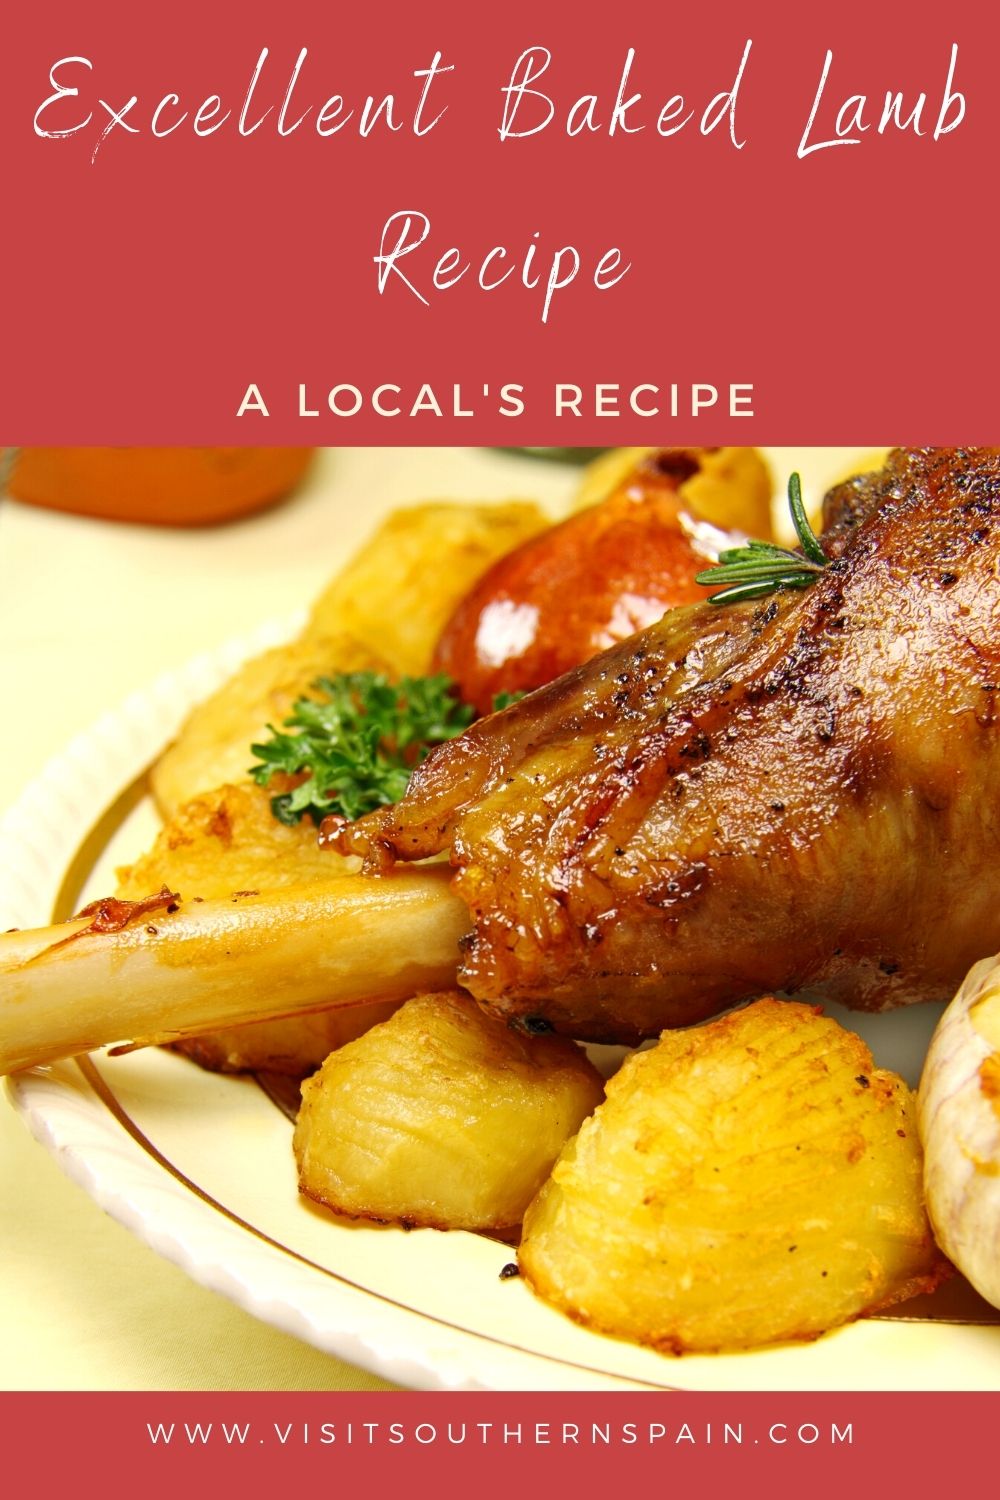 Are you looking for an Excellent Baked Lamb Recipe from Spain? The leg of lamb recipe is exactly what you need if you want a simple and savory lamb roast done in no time. This is one of the best baked lamb recipes from Spain that will impress you and your guests with its simplicity. This baked lamb leg is incredibly succulent & delicious and with our baked lamb recipe, you can learn how to cook lamb like a chef. Try our oven-baked lamb now! #bakedlamb #lambrecipe #spanishbakedlamb #lambroast 